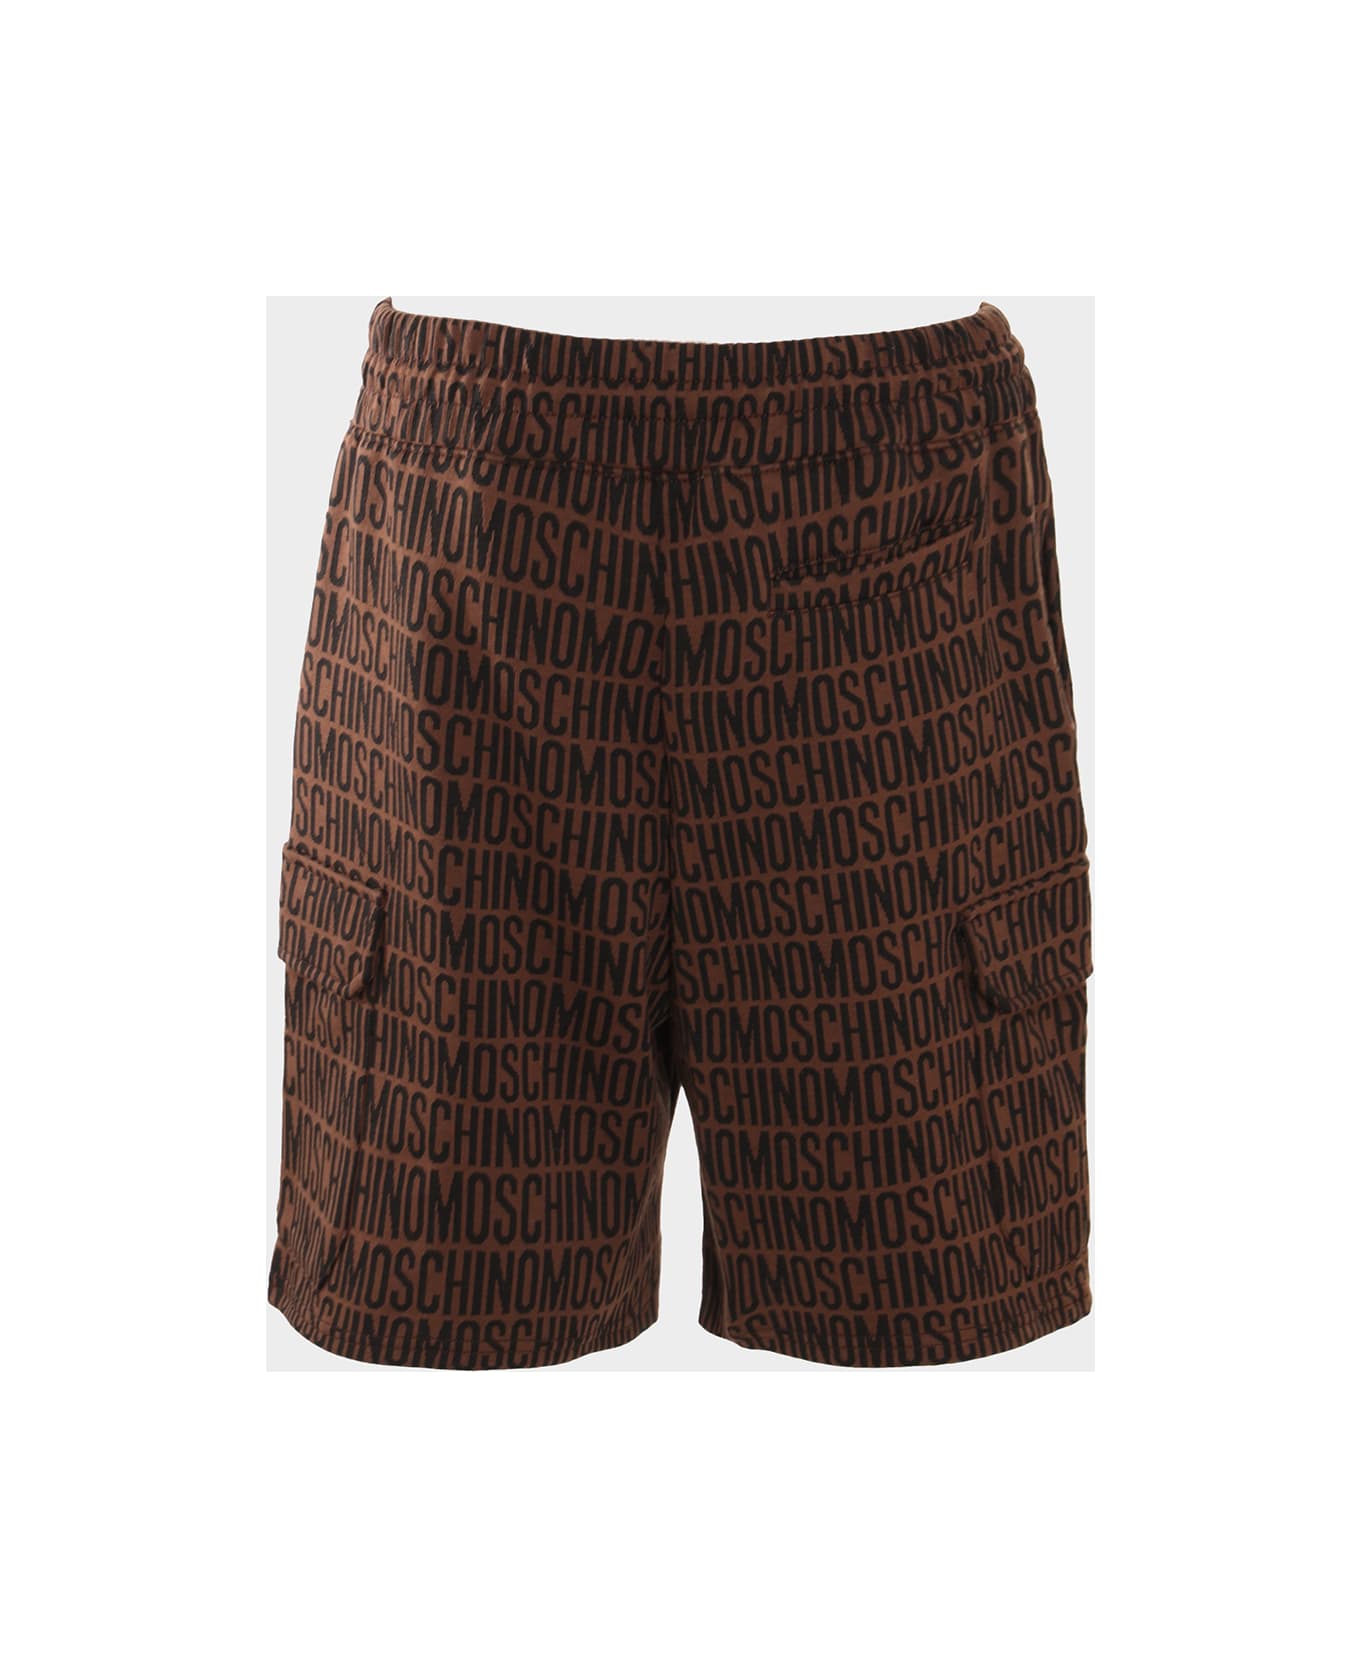 Moschino Brown And Black Cotton Shorts - Brown ショートパンツ